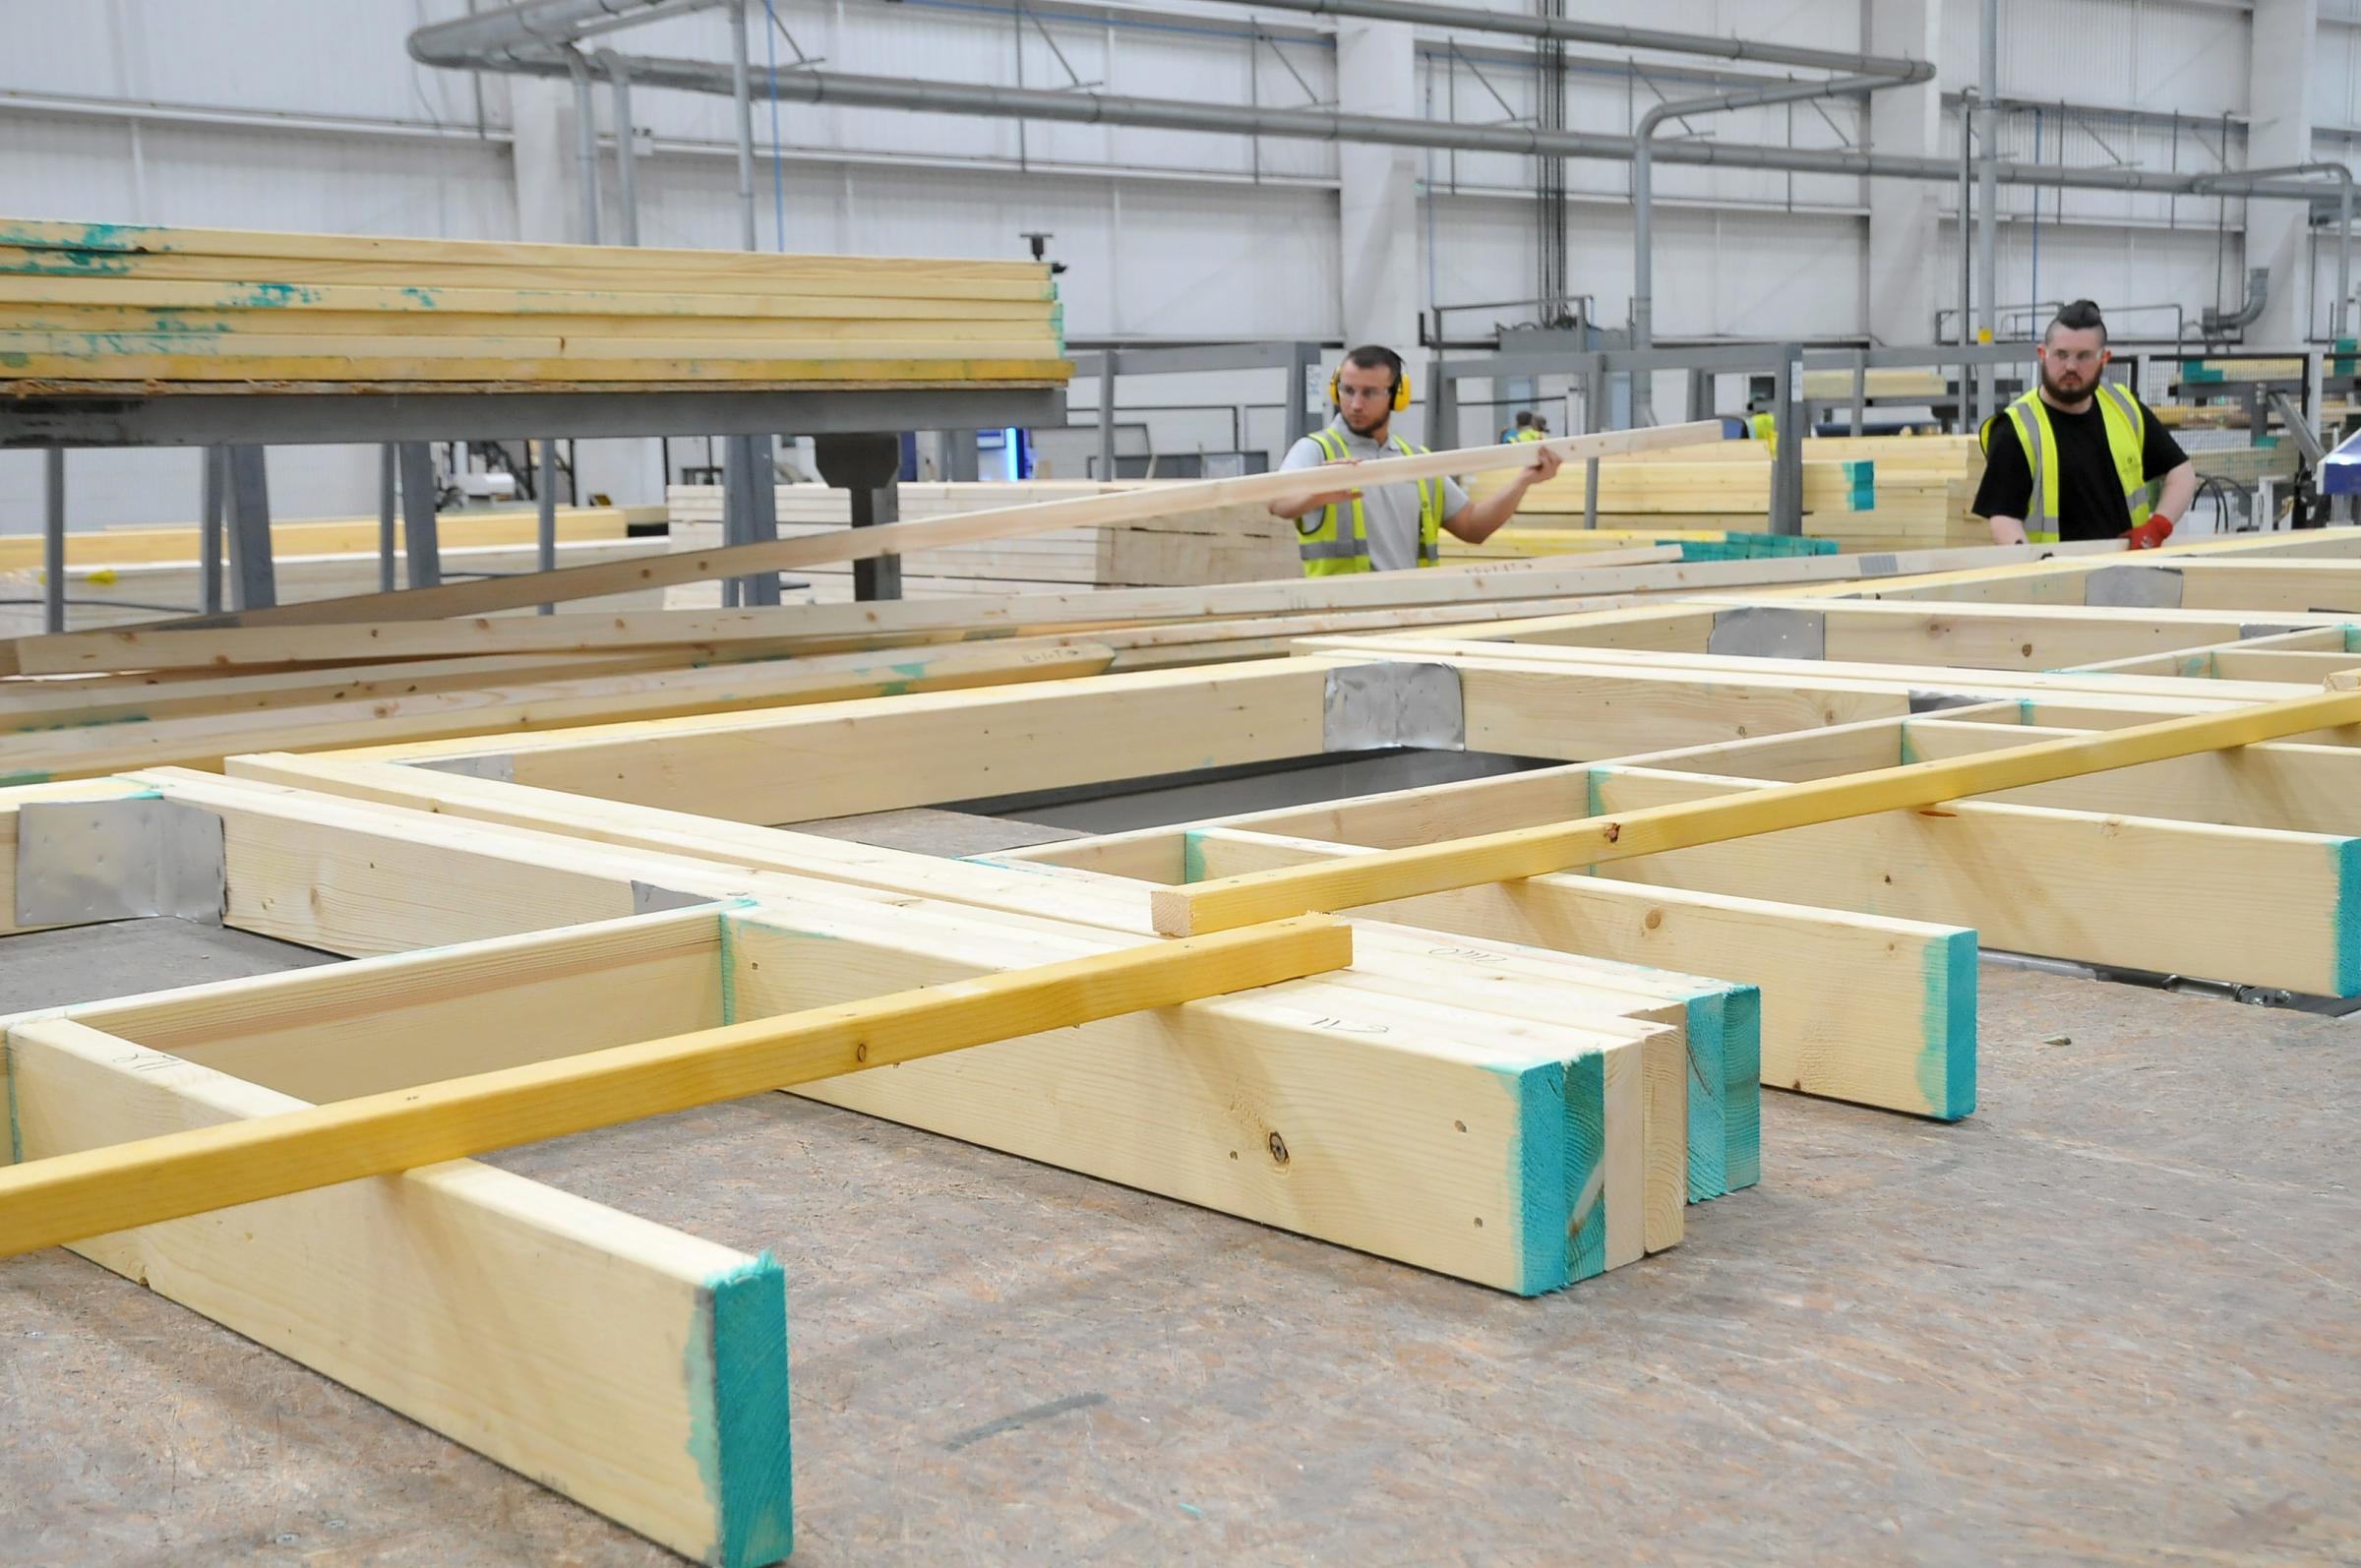 Workers prepare the timber at the beginning of the process